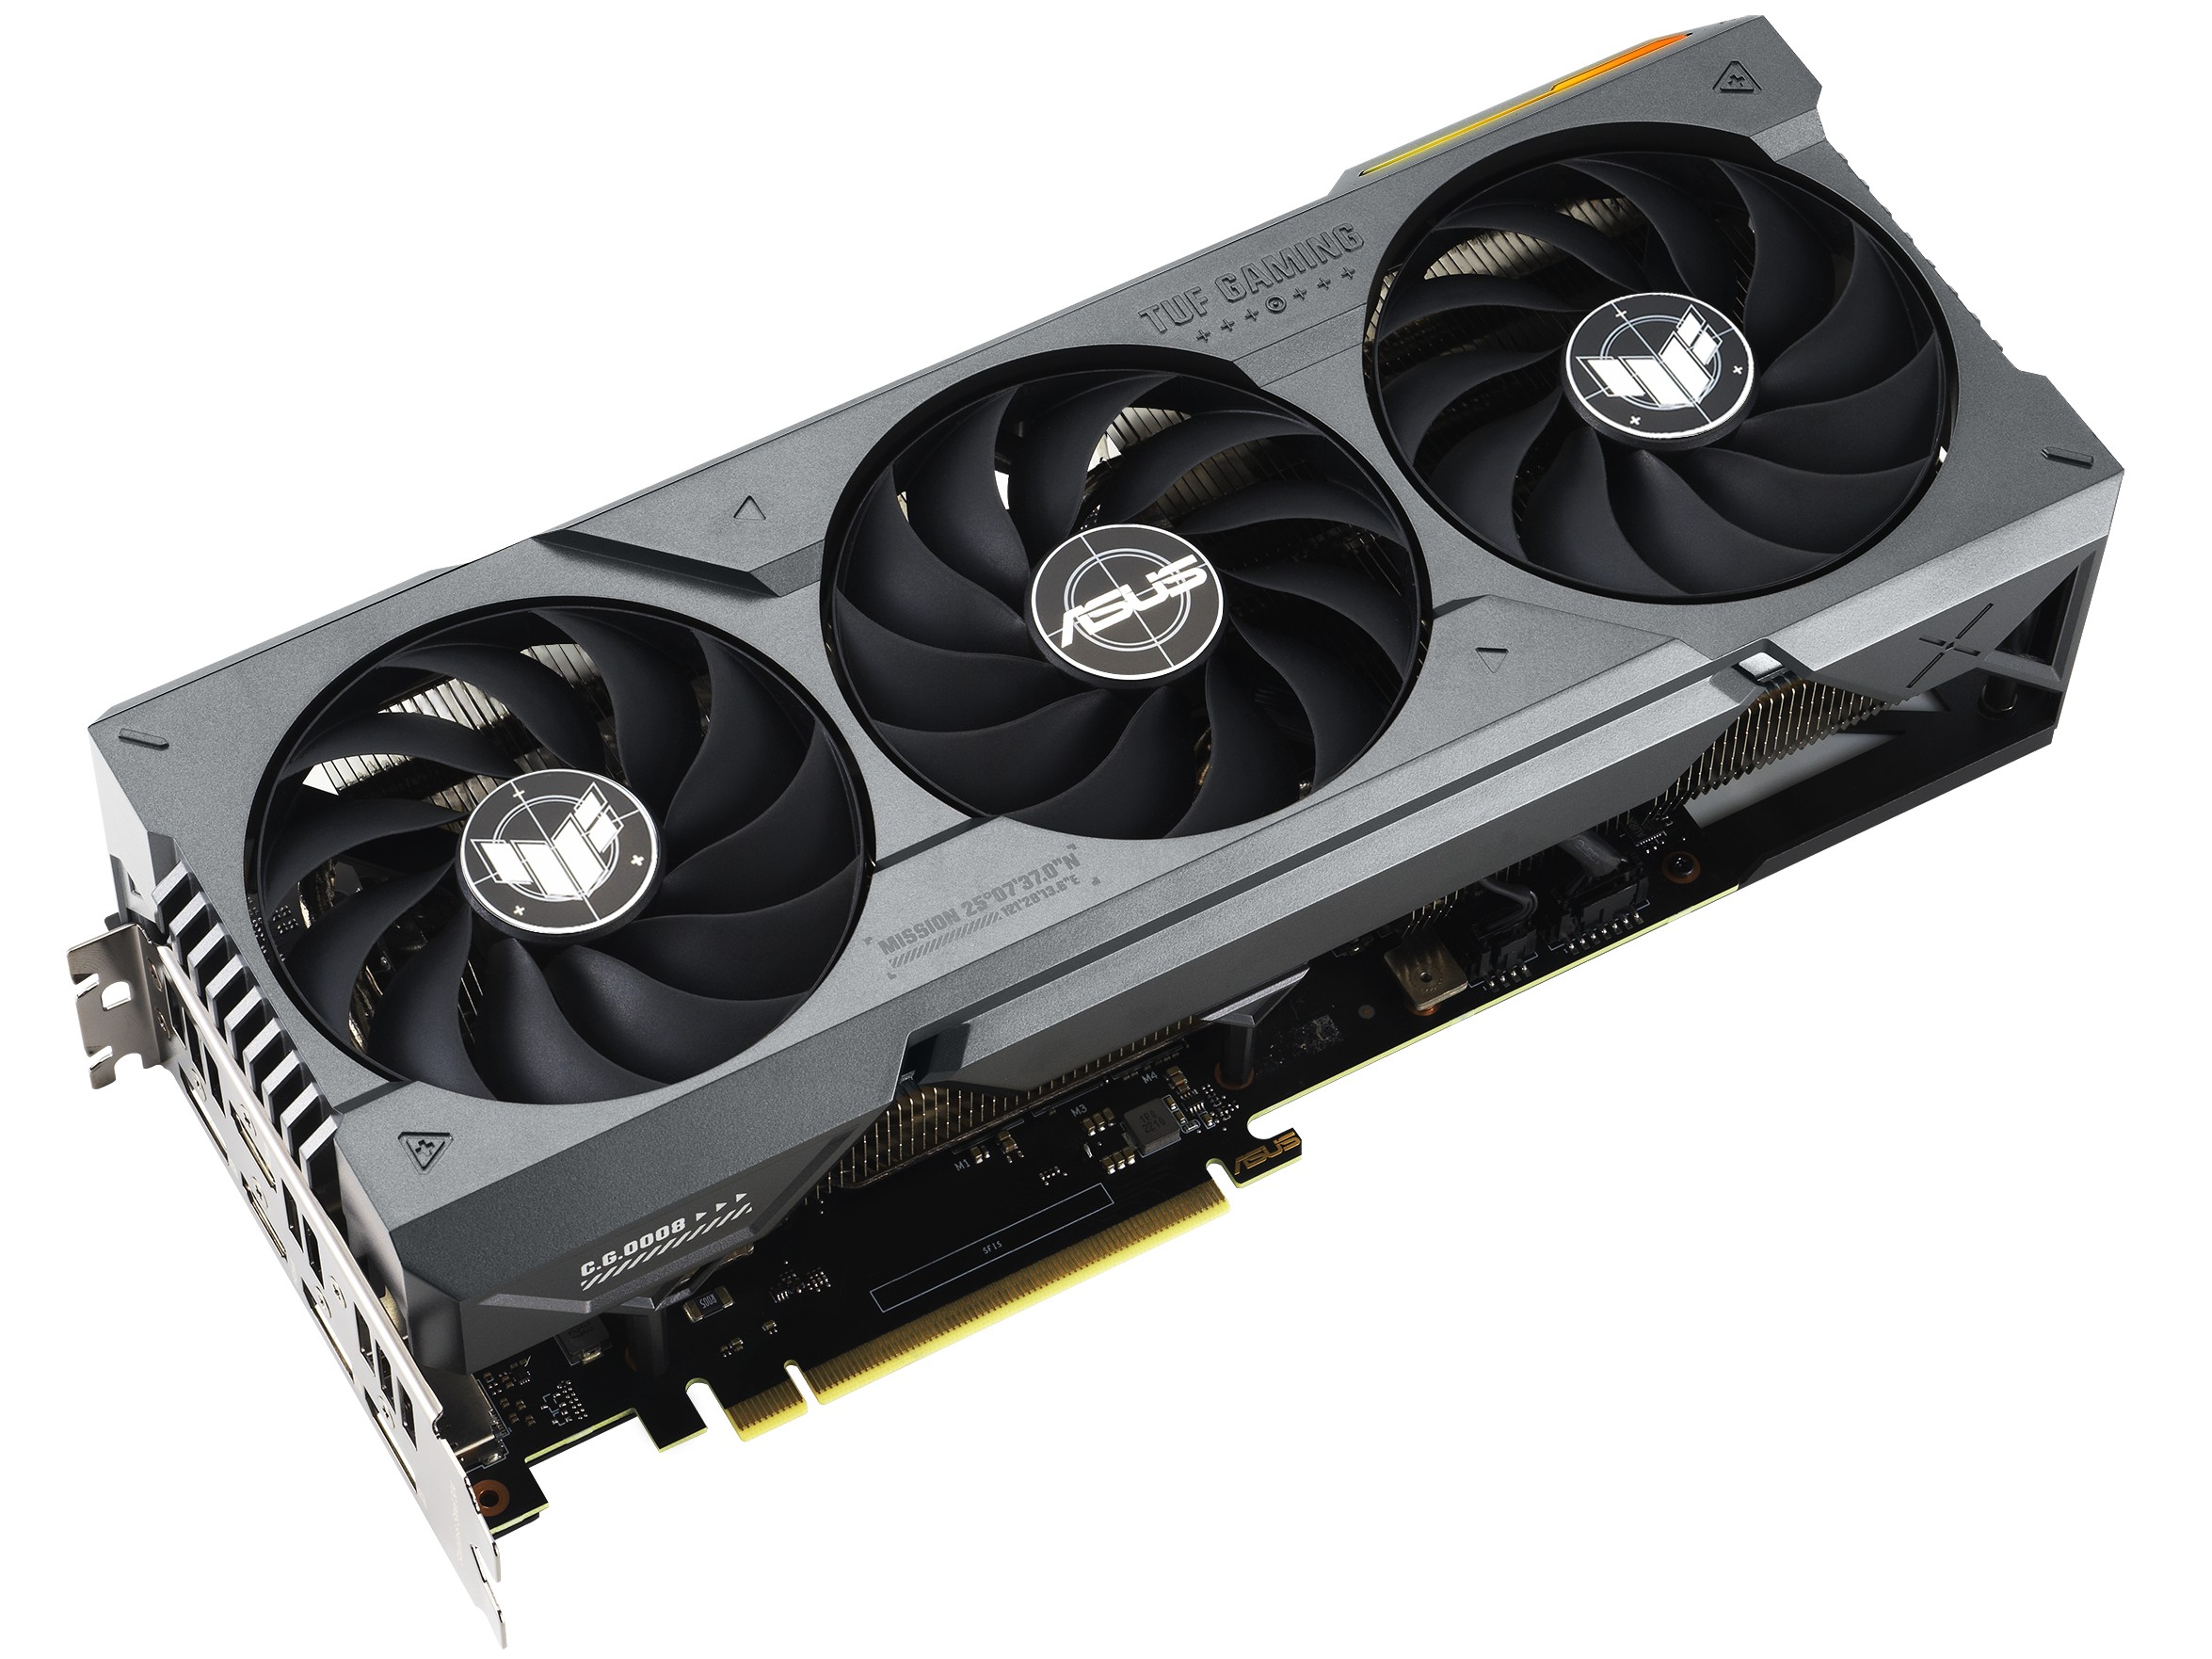 GeForce RTX 4070 Ti Super by Asus: 9 cards, 3 different designs 